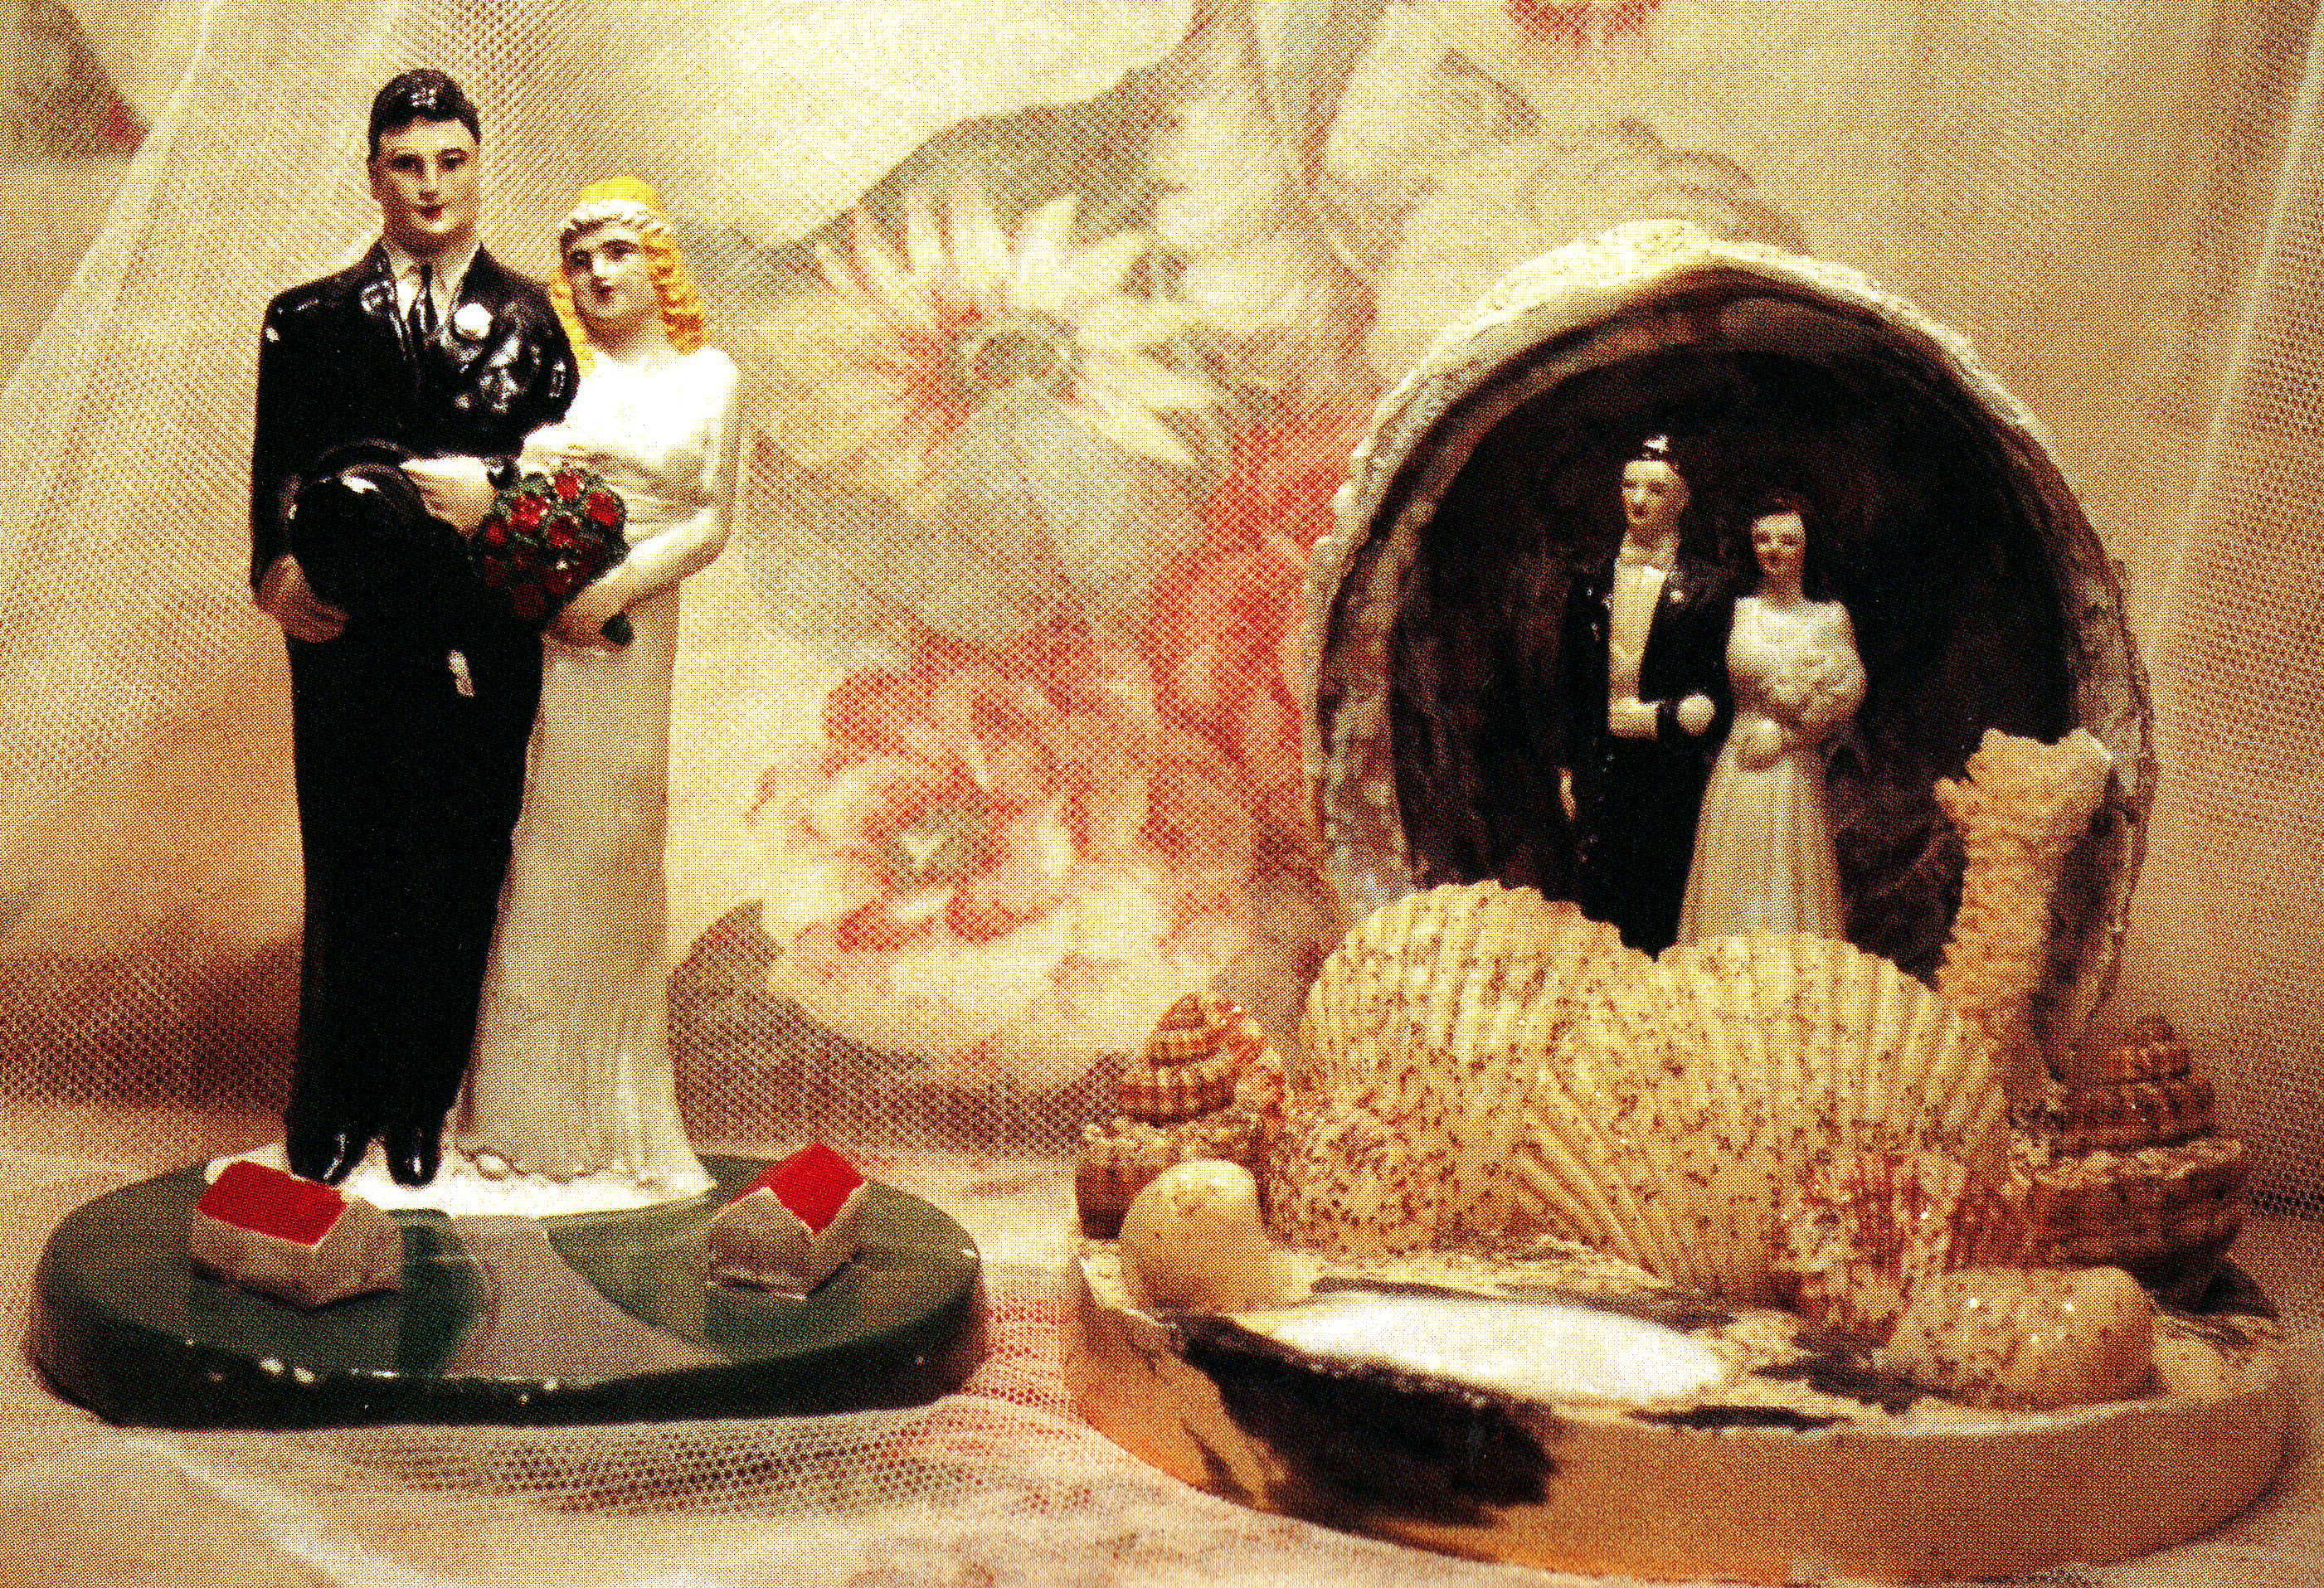 two bride and groom figures in different tableaux